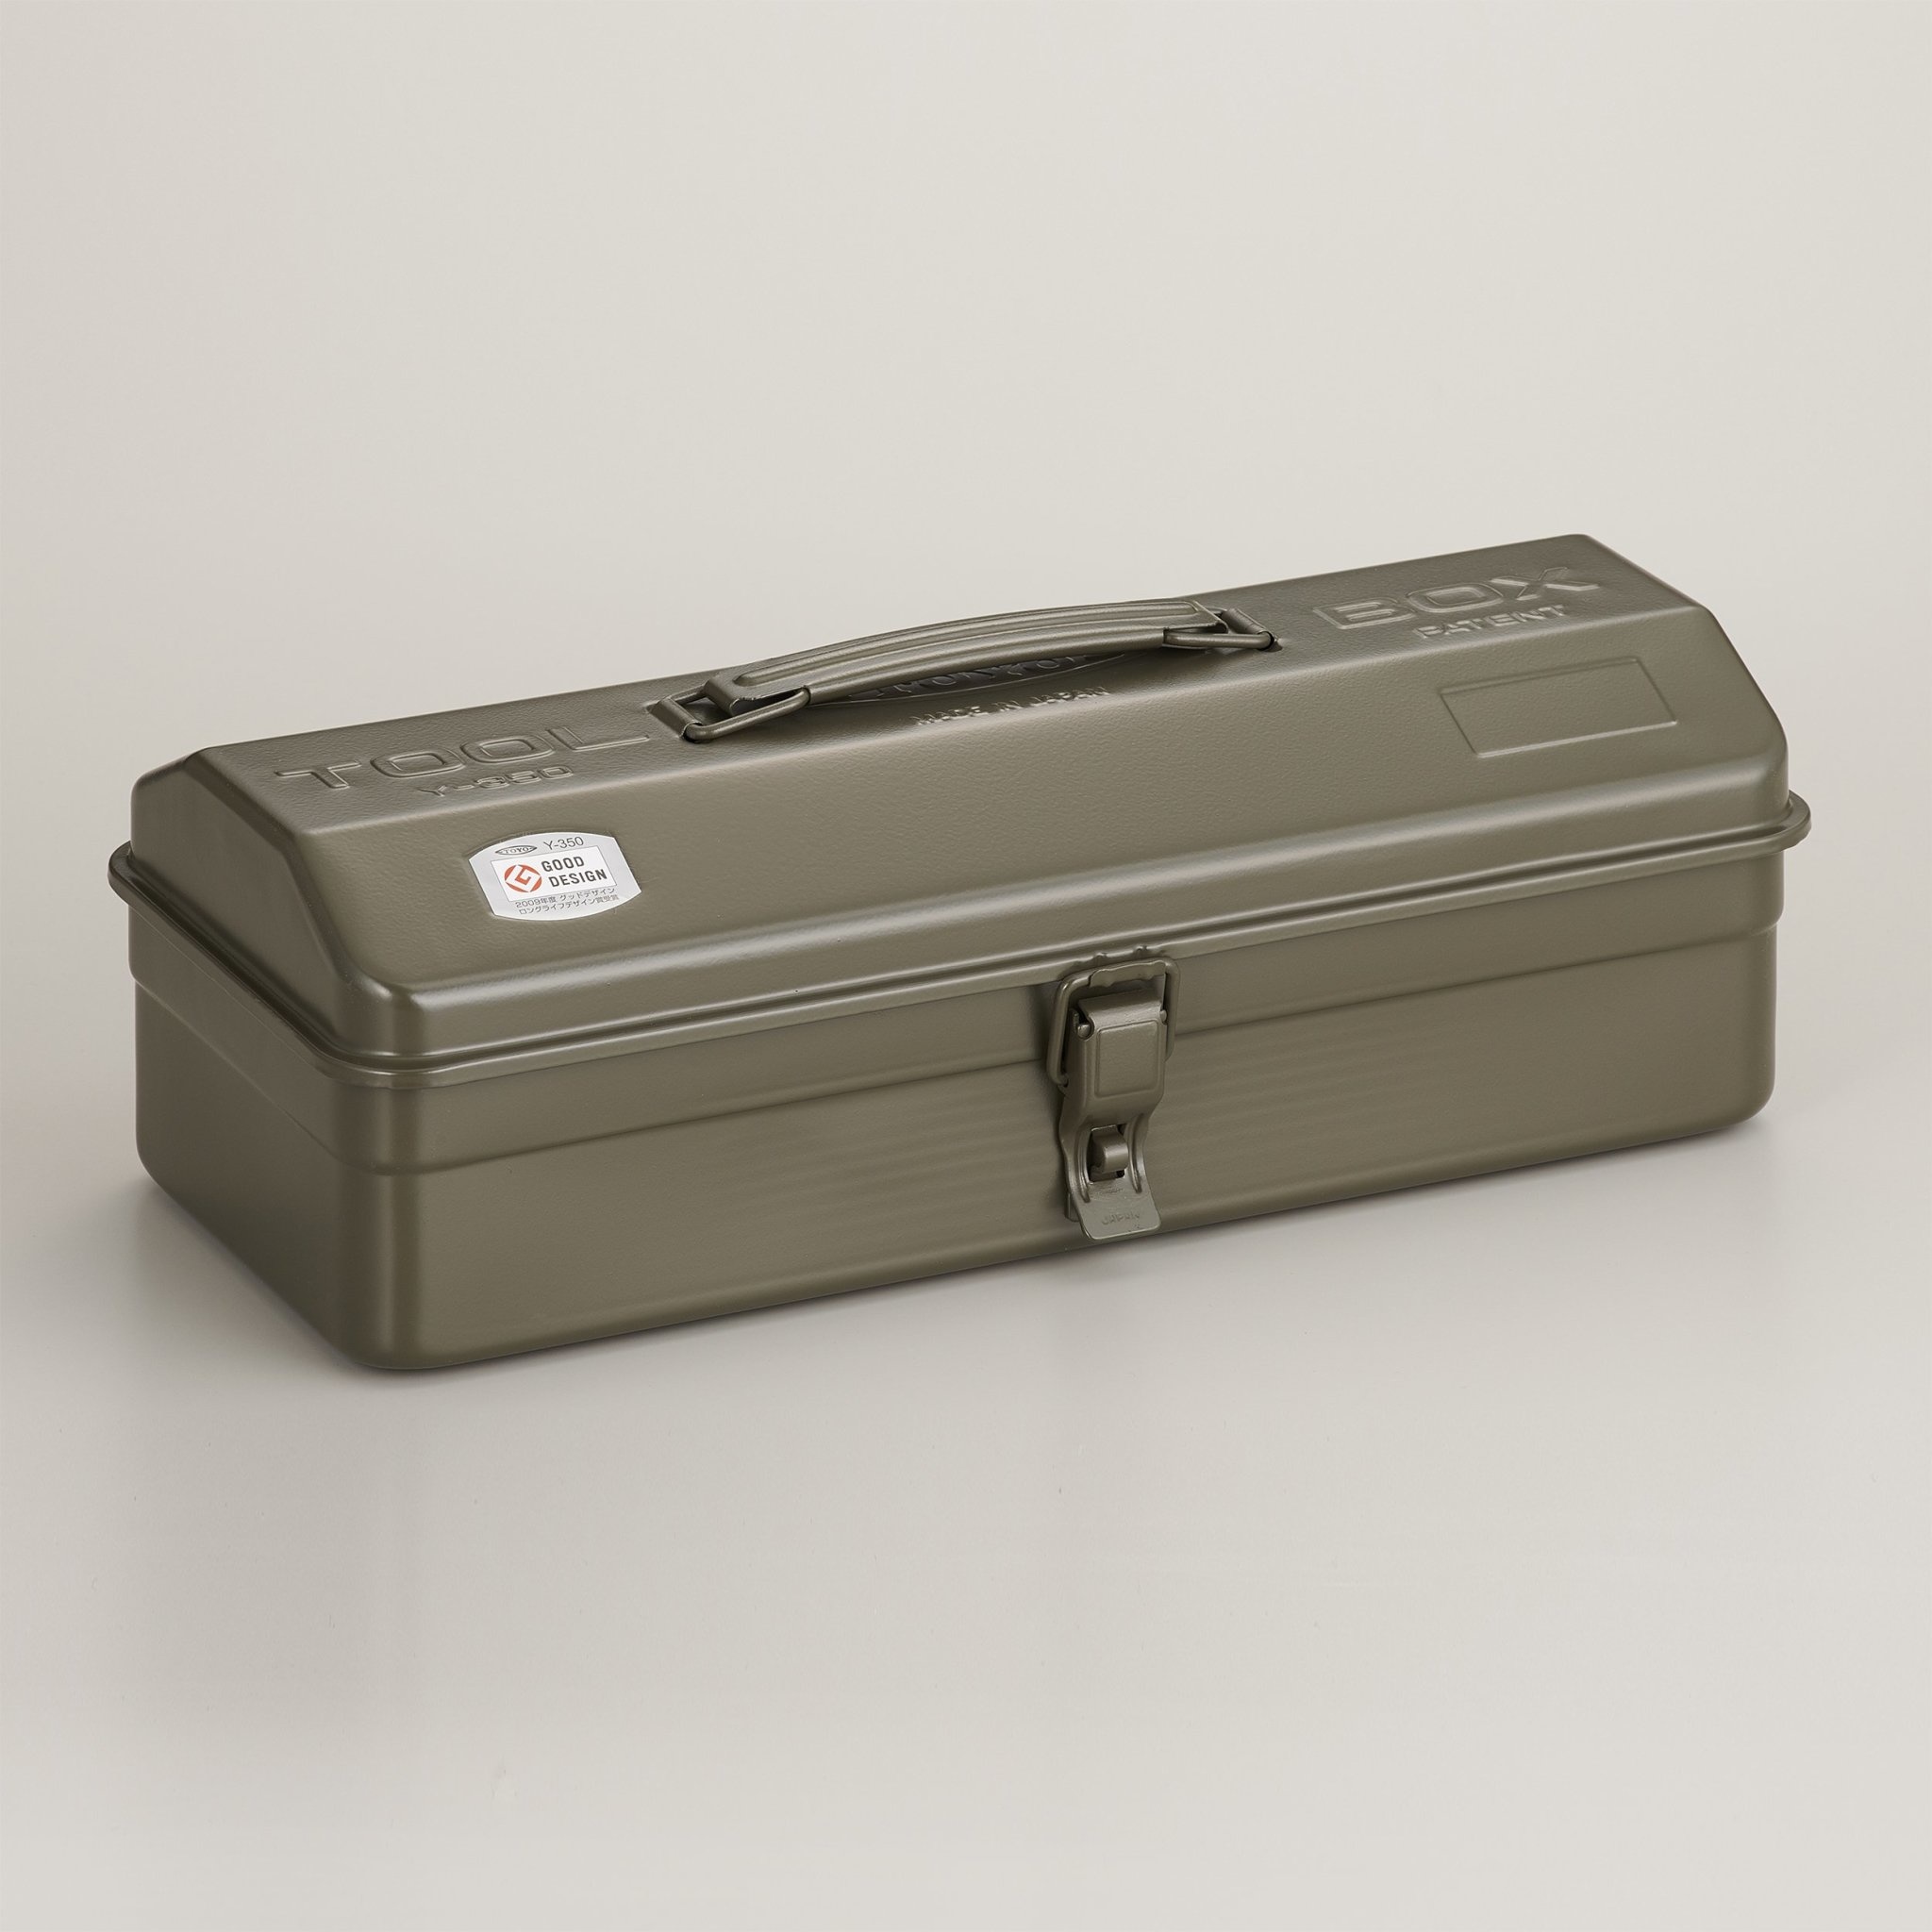 TOYO Steel 2-stage tool box ST-350MG Military Green 